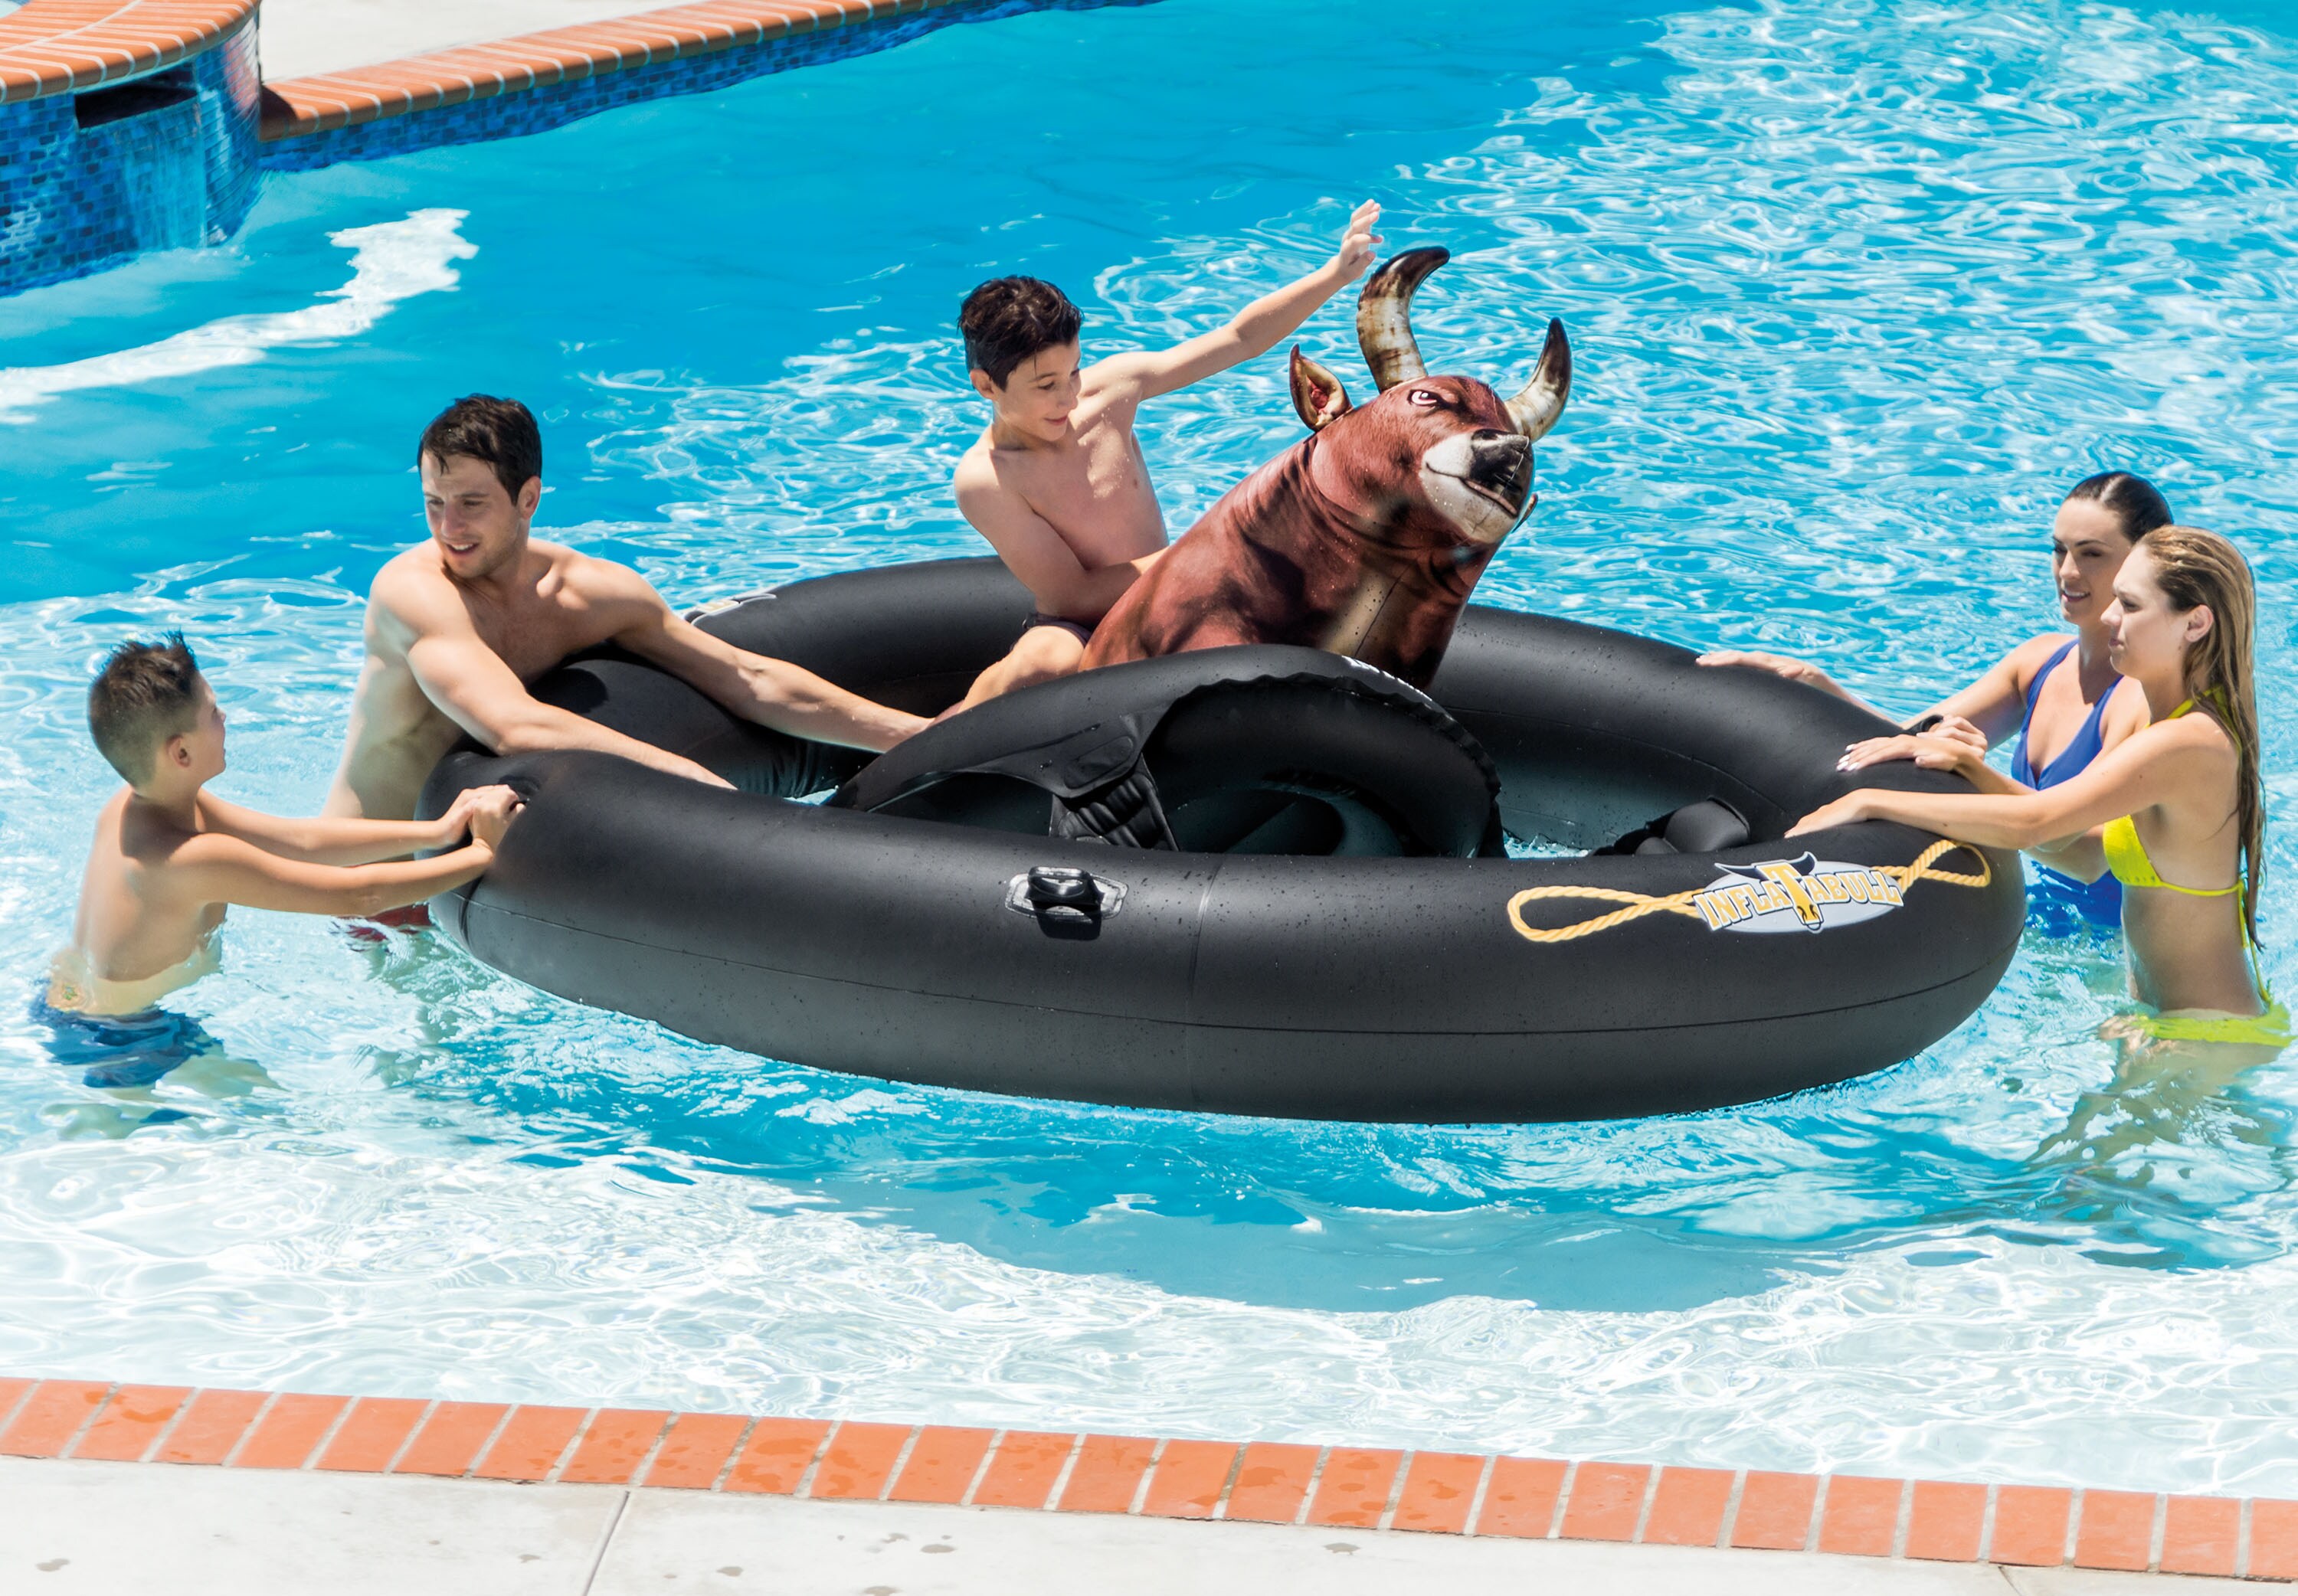 Inflatable Ride-On Pool Toy with Realistic Printing for sale online Intex Inflat-A-Bull 